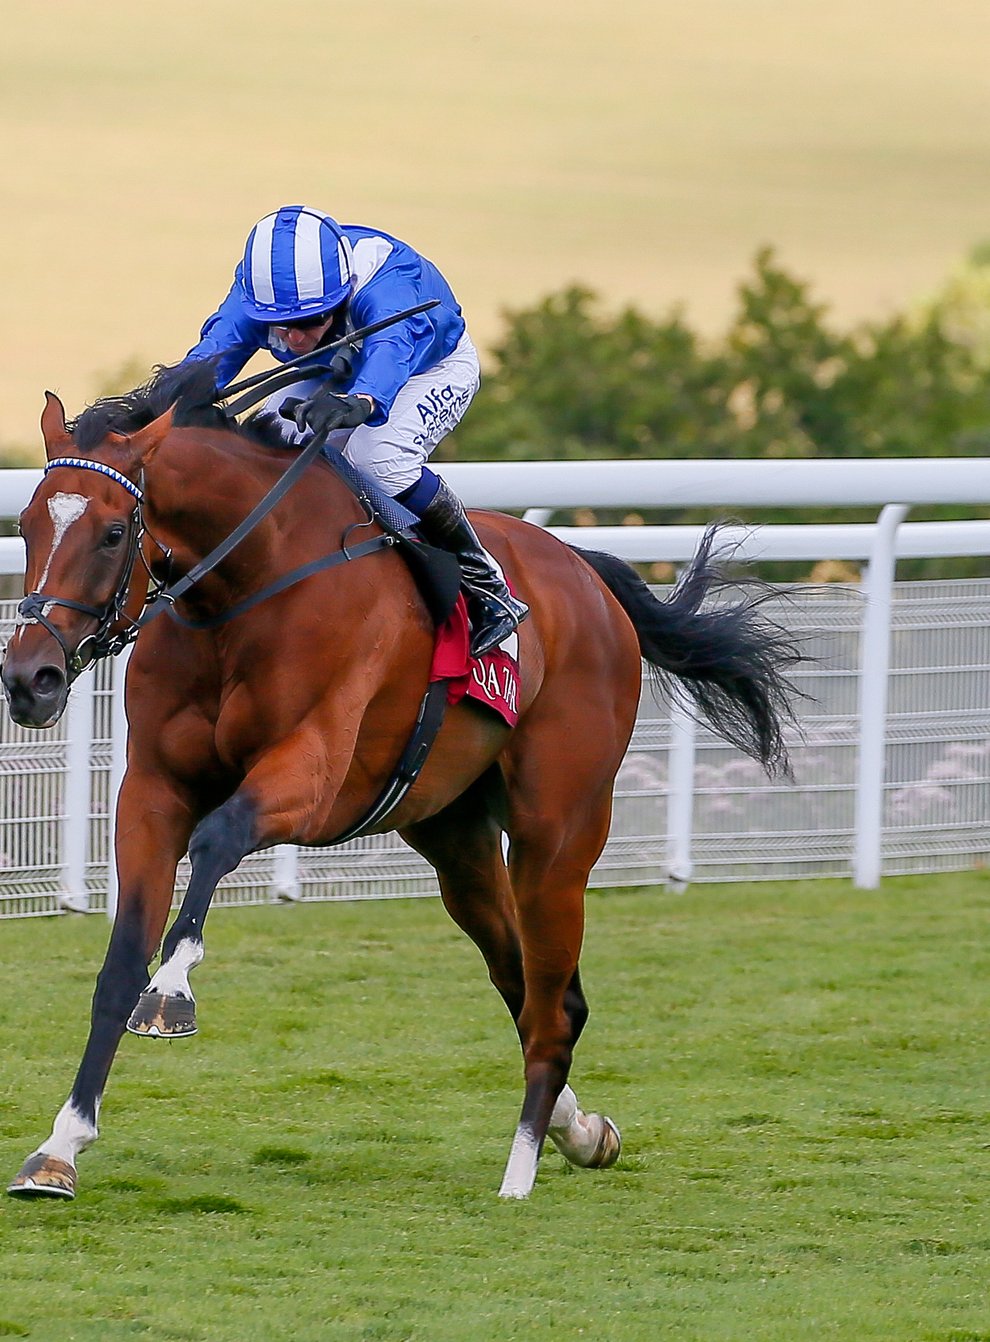 Enbihaar on her way to a smooth victory in the Qatar Lillie Langtry Stakes at Goodwood